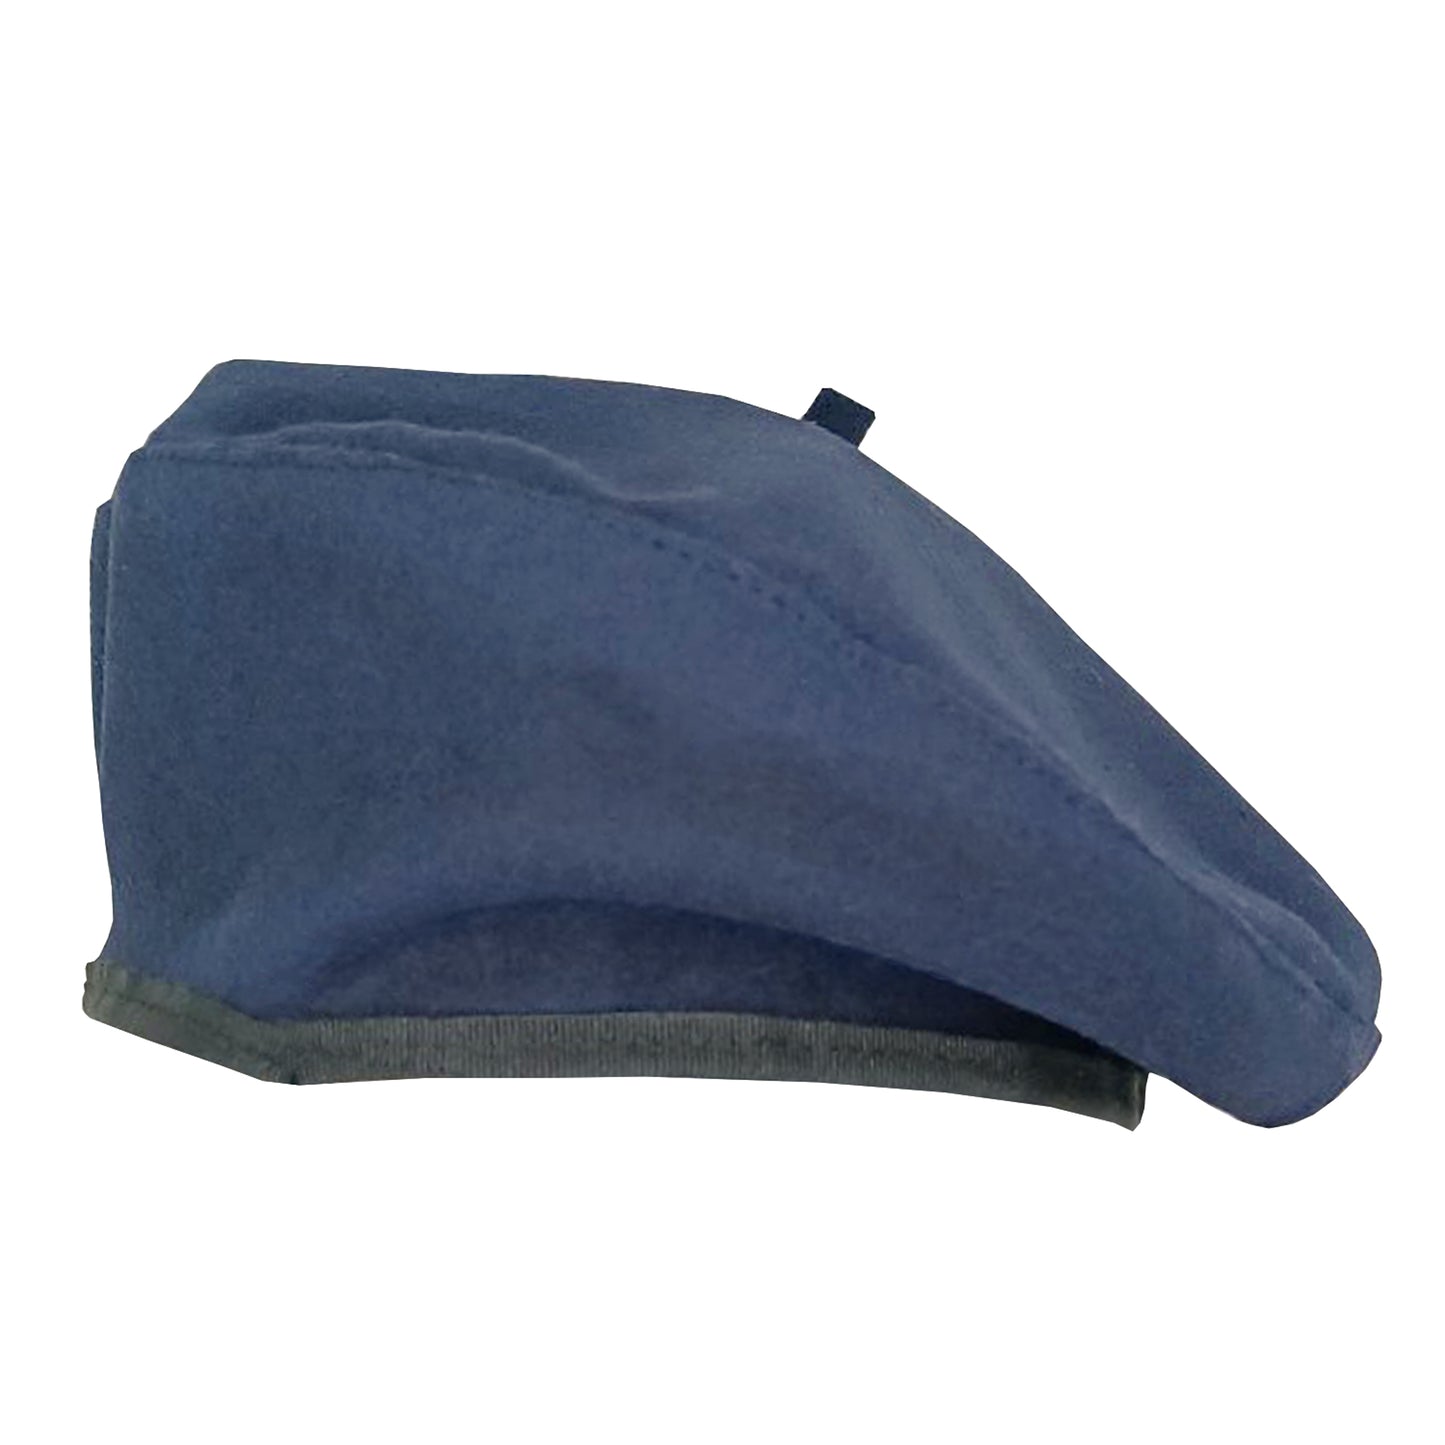 French Beret Blue 1049 NAVY